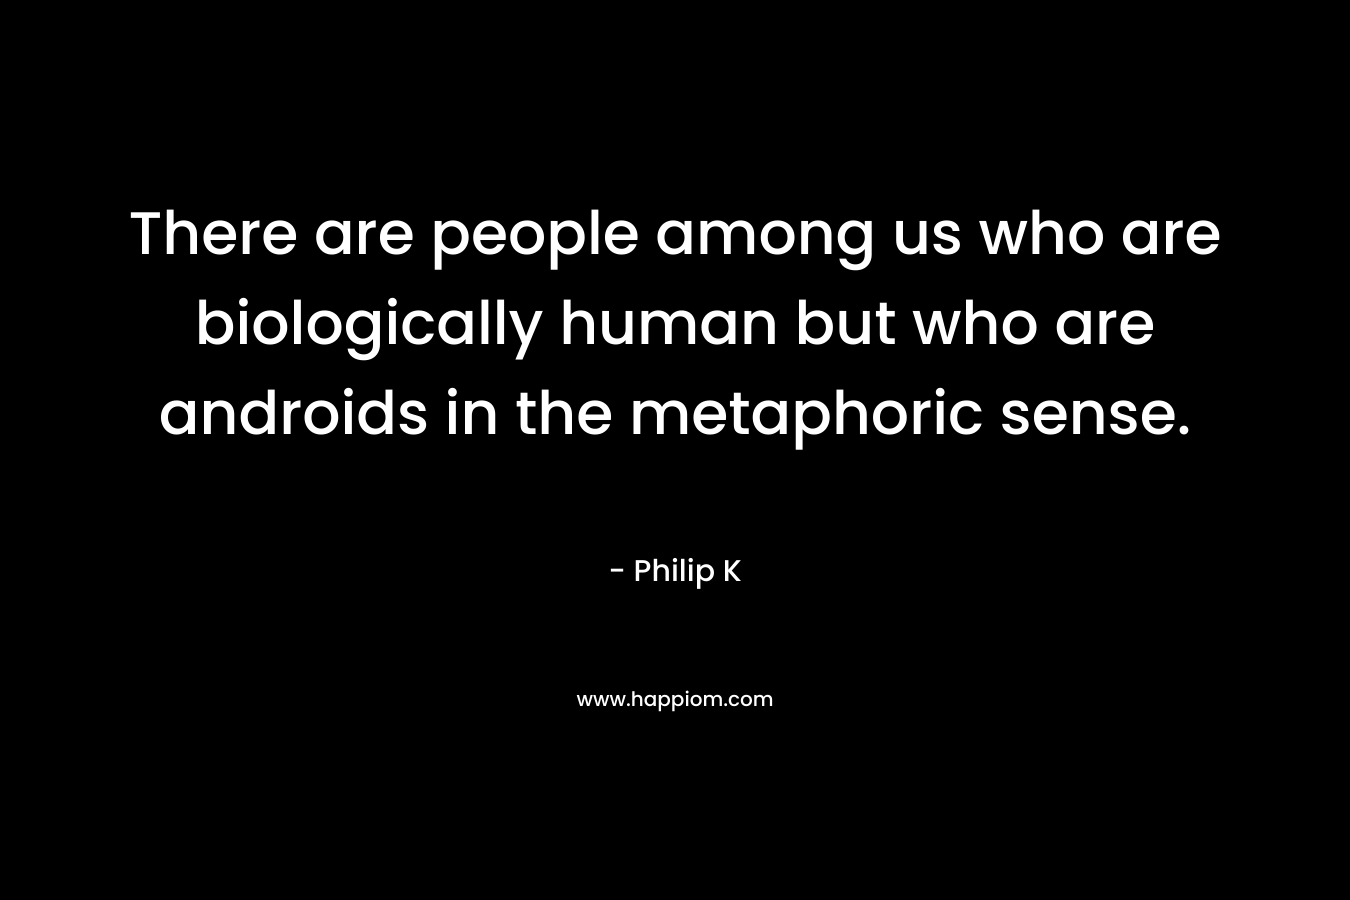 There are people among us who are biologically human but who are androids in the metaphoric sense.